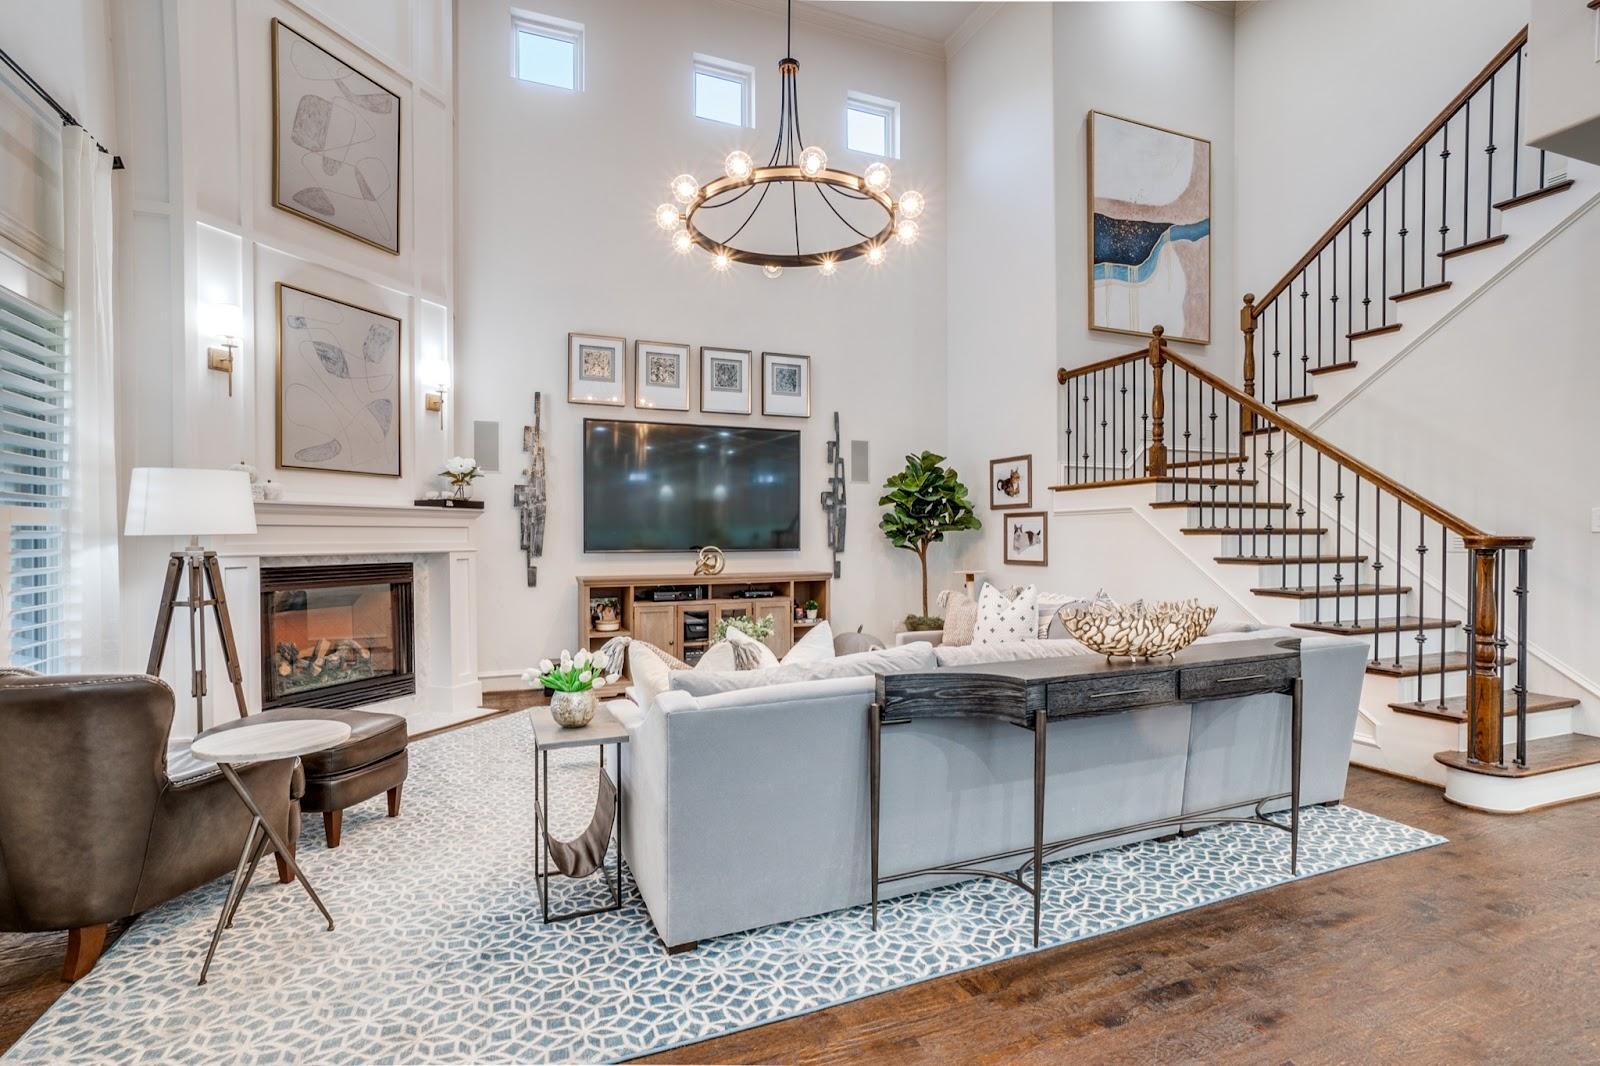 Designs-by-Keti-Dallas-Home-Design-Staging-Renovating-Timeless-Living-room-chandelier-Family-Friendly-Before-And-After